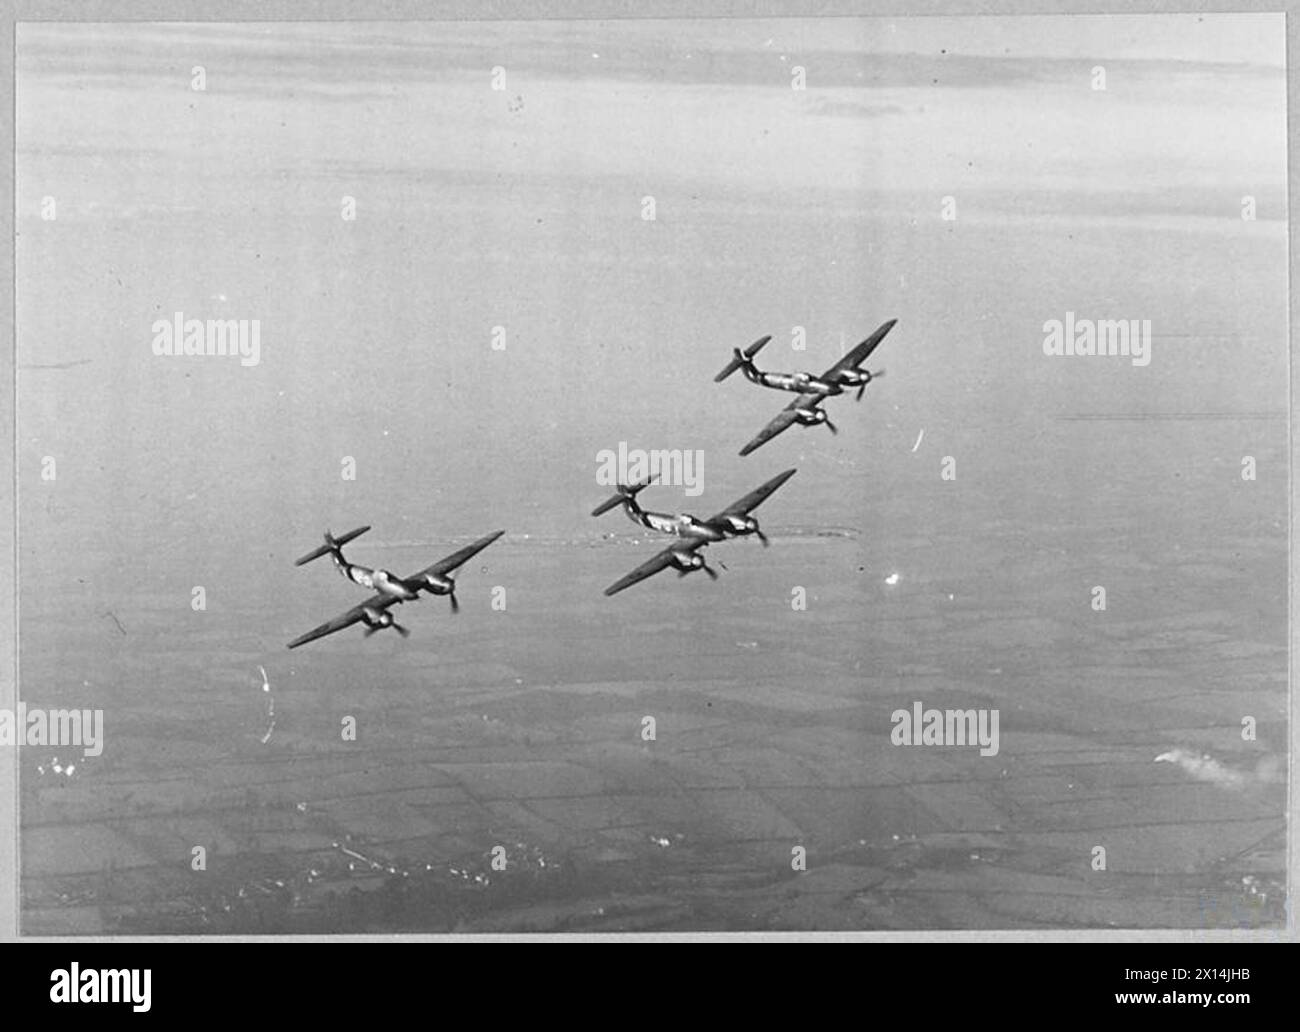 WESTLAND 'WHIRLWINDS' - 4994 Whirlwinds in flight Royal Air Force Stock Photo